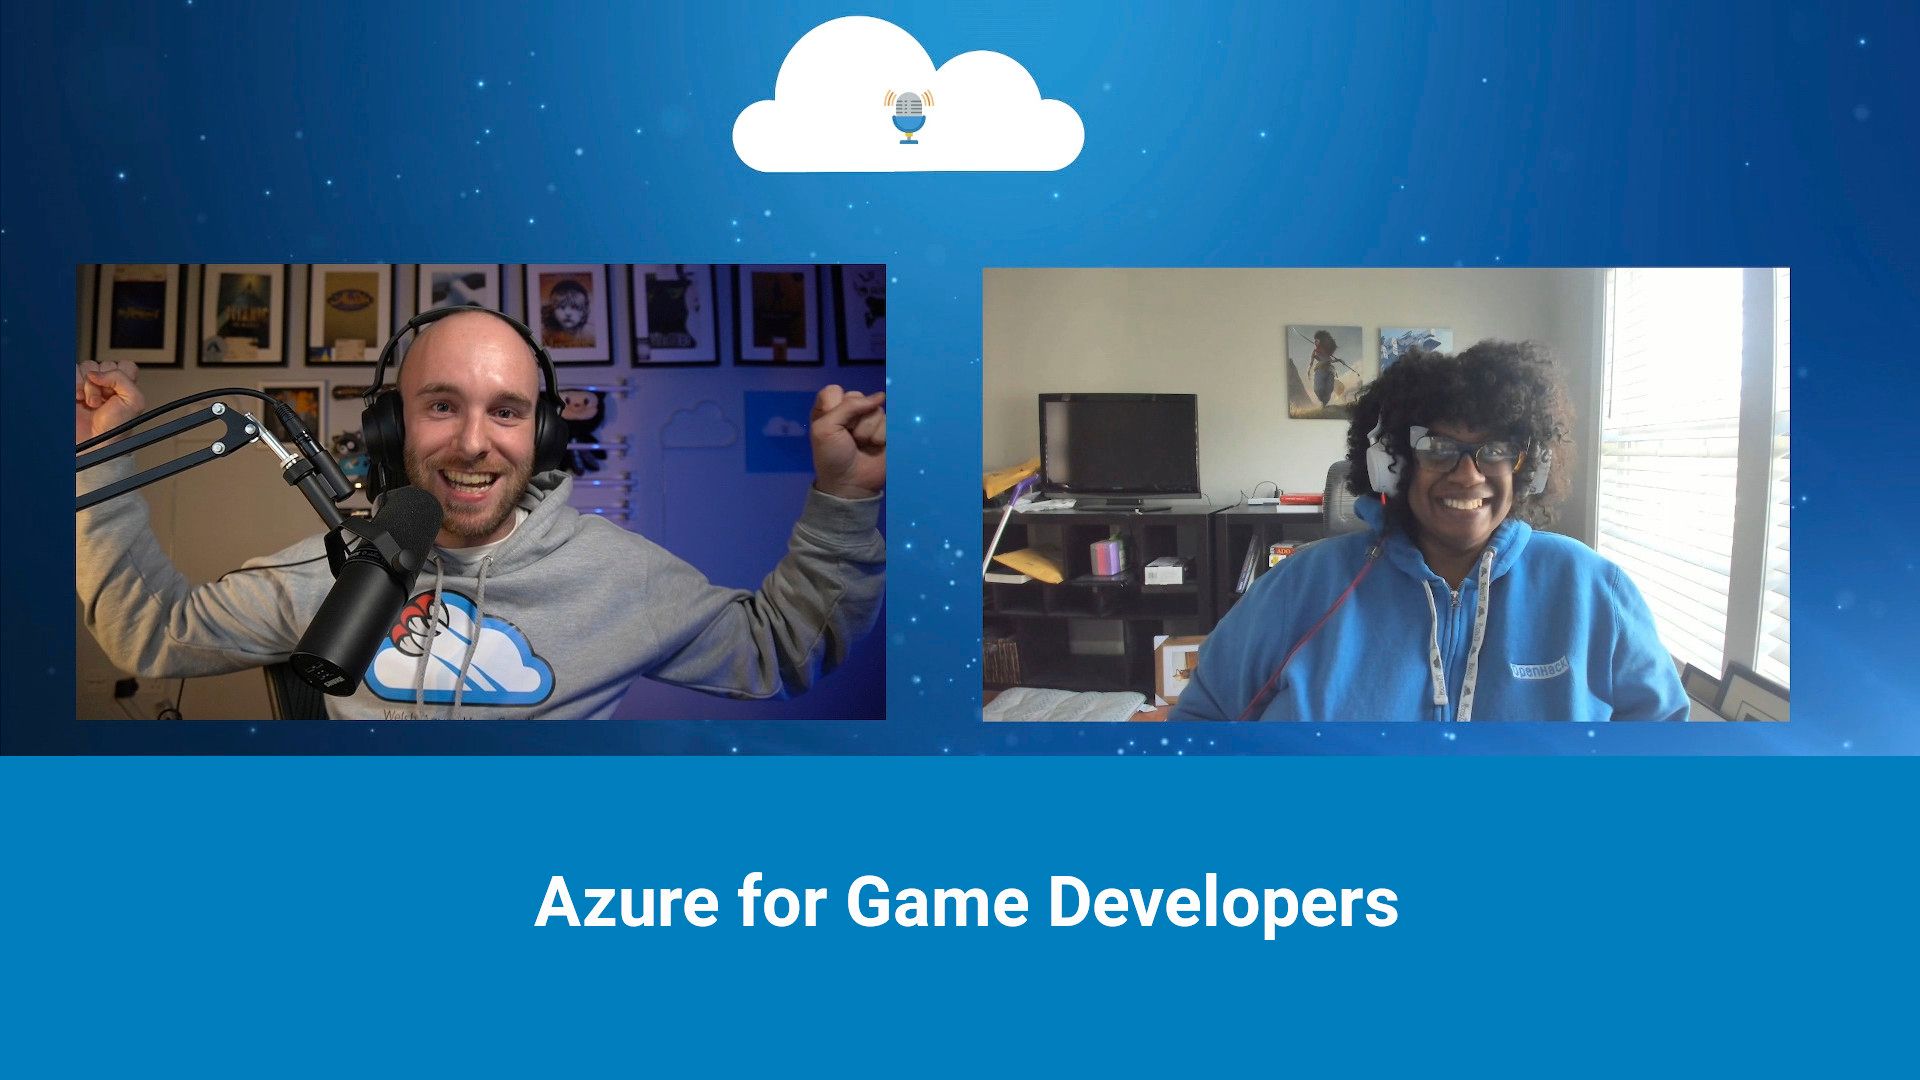 CGN8 - Cloud Gaming Notes Episode 8 - Azure for Game Developers